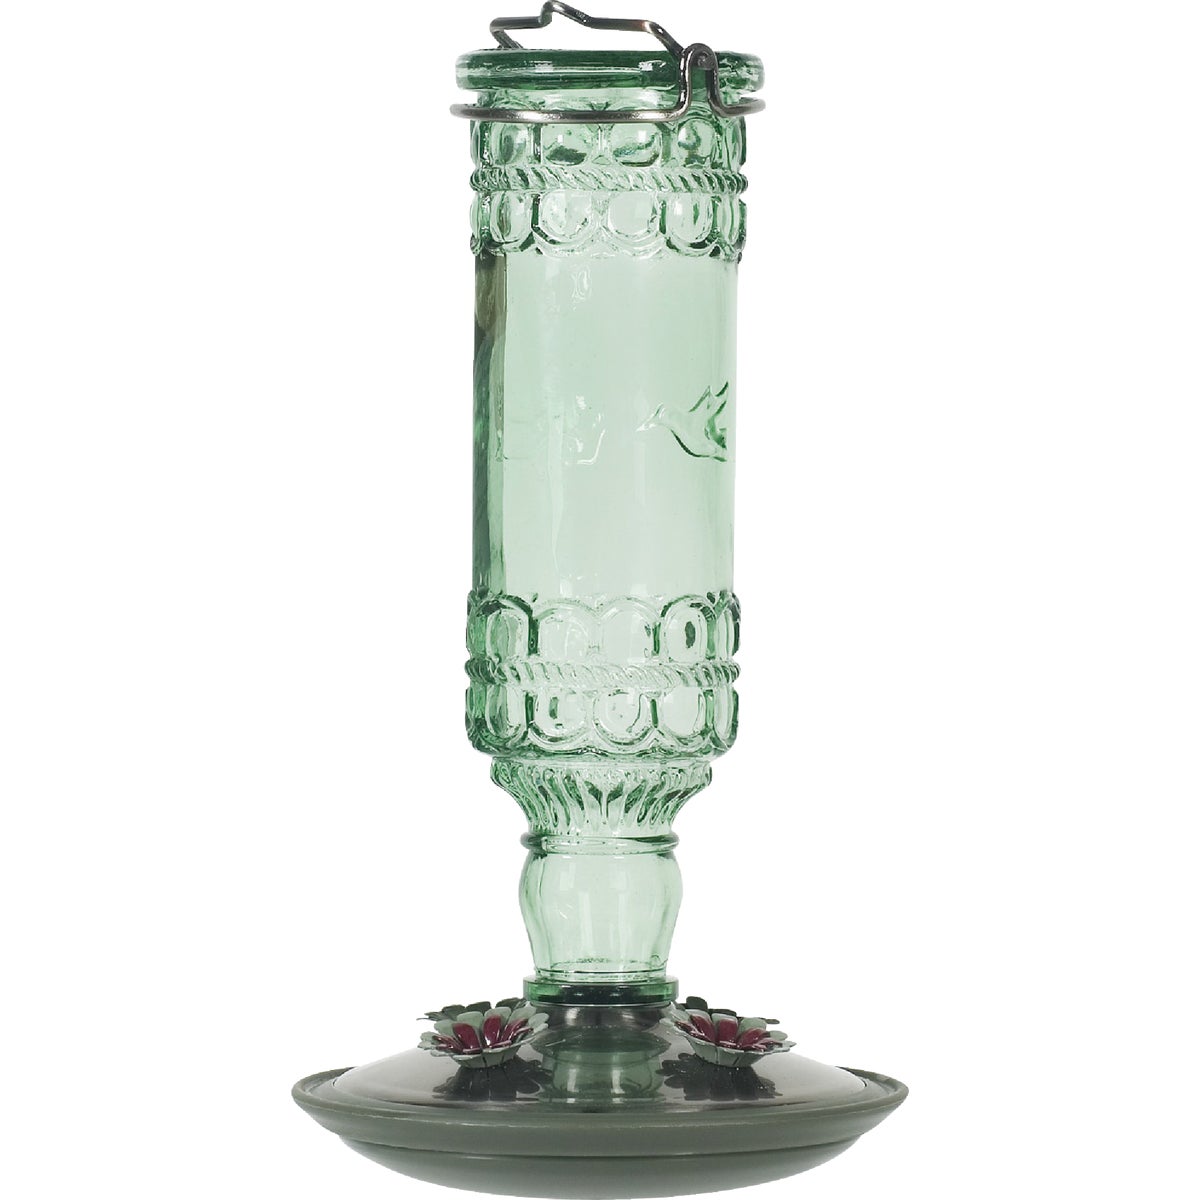 Item 754699, Features an antique glass bottle design with 4 decorative flower feeding 